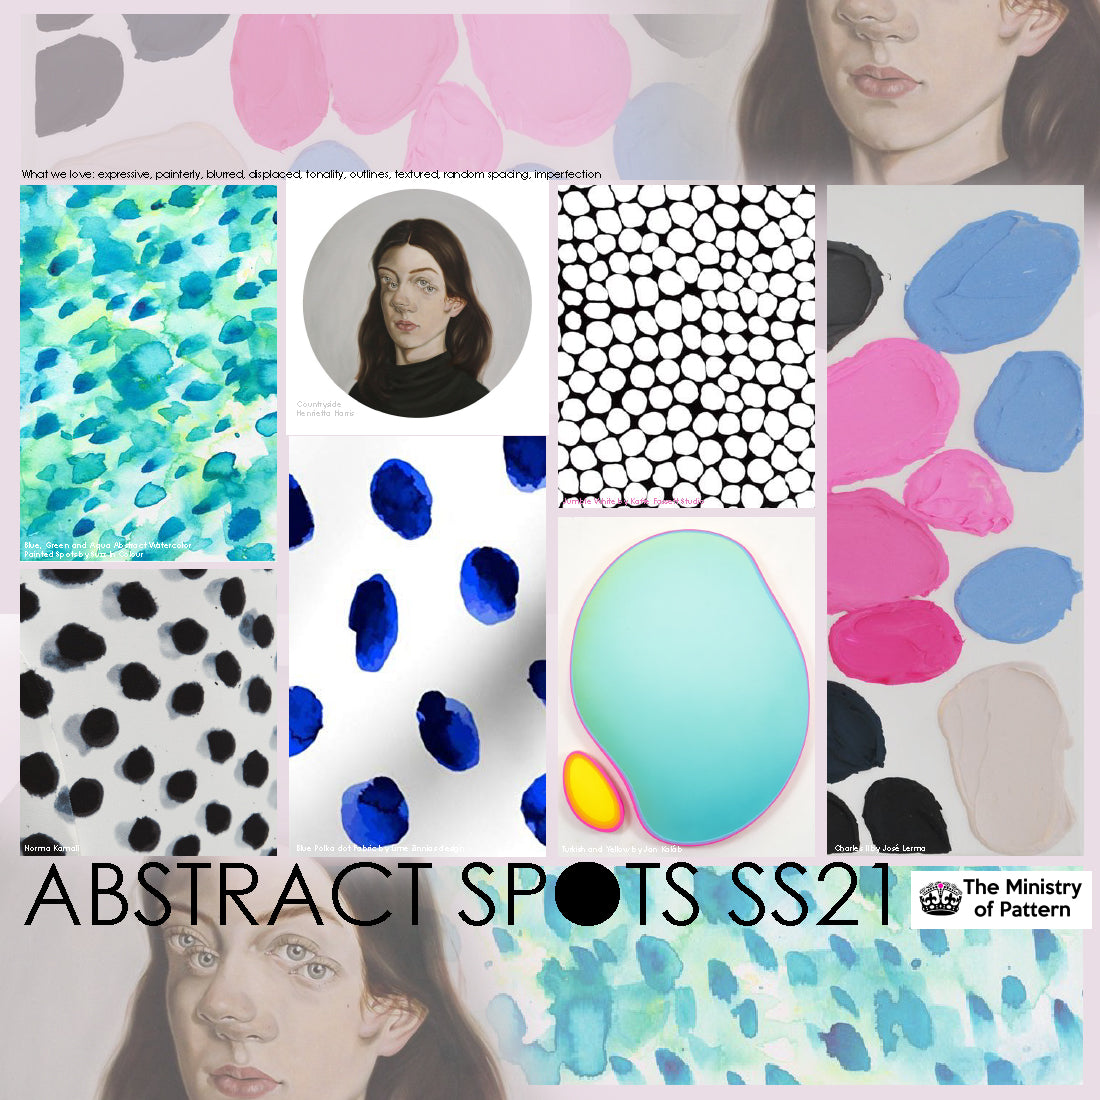 Abstract Spots SS21